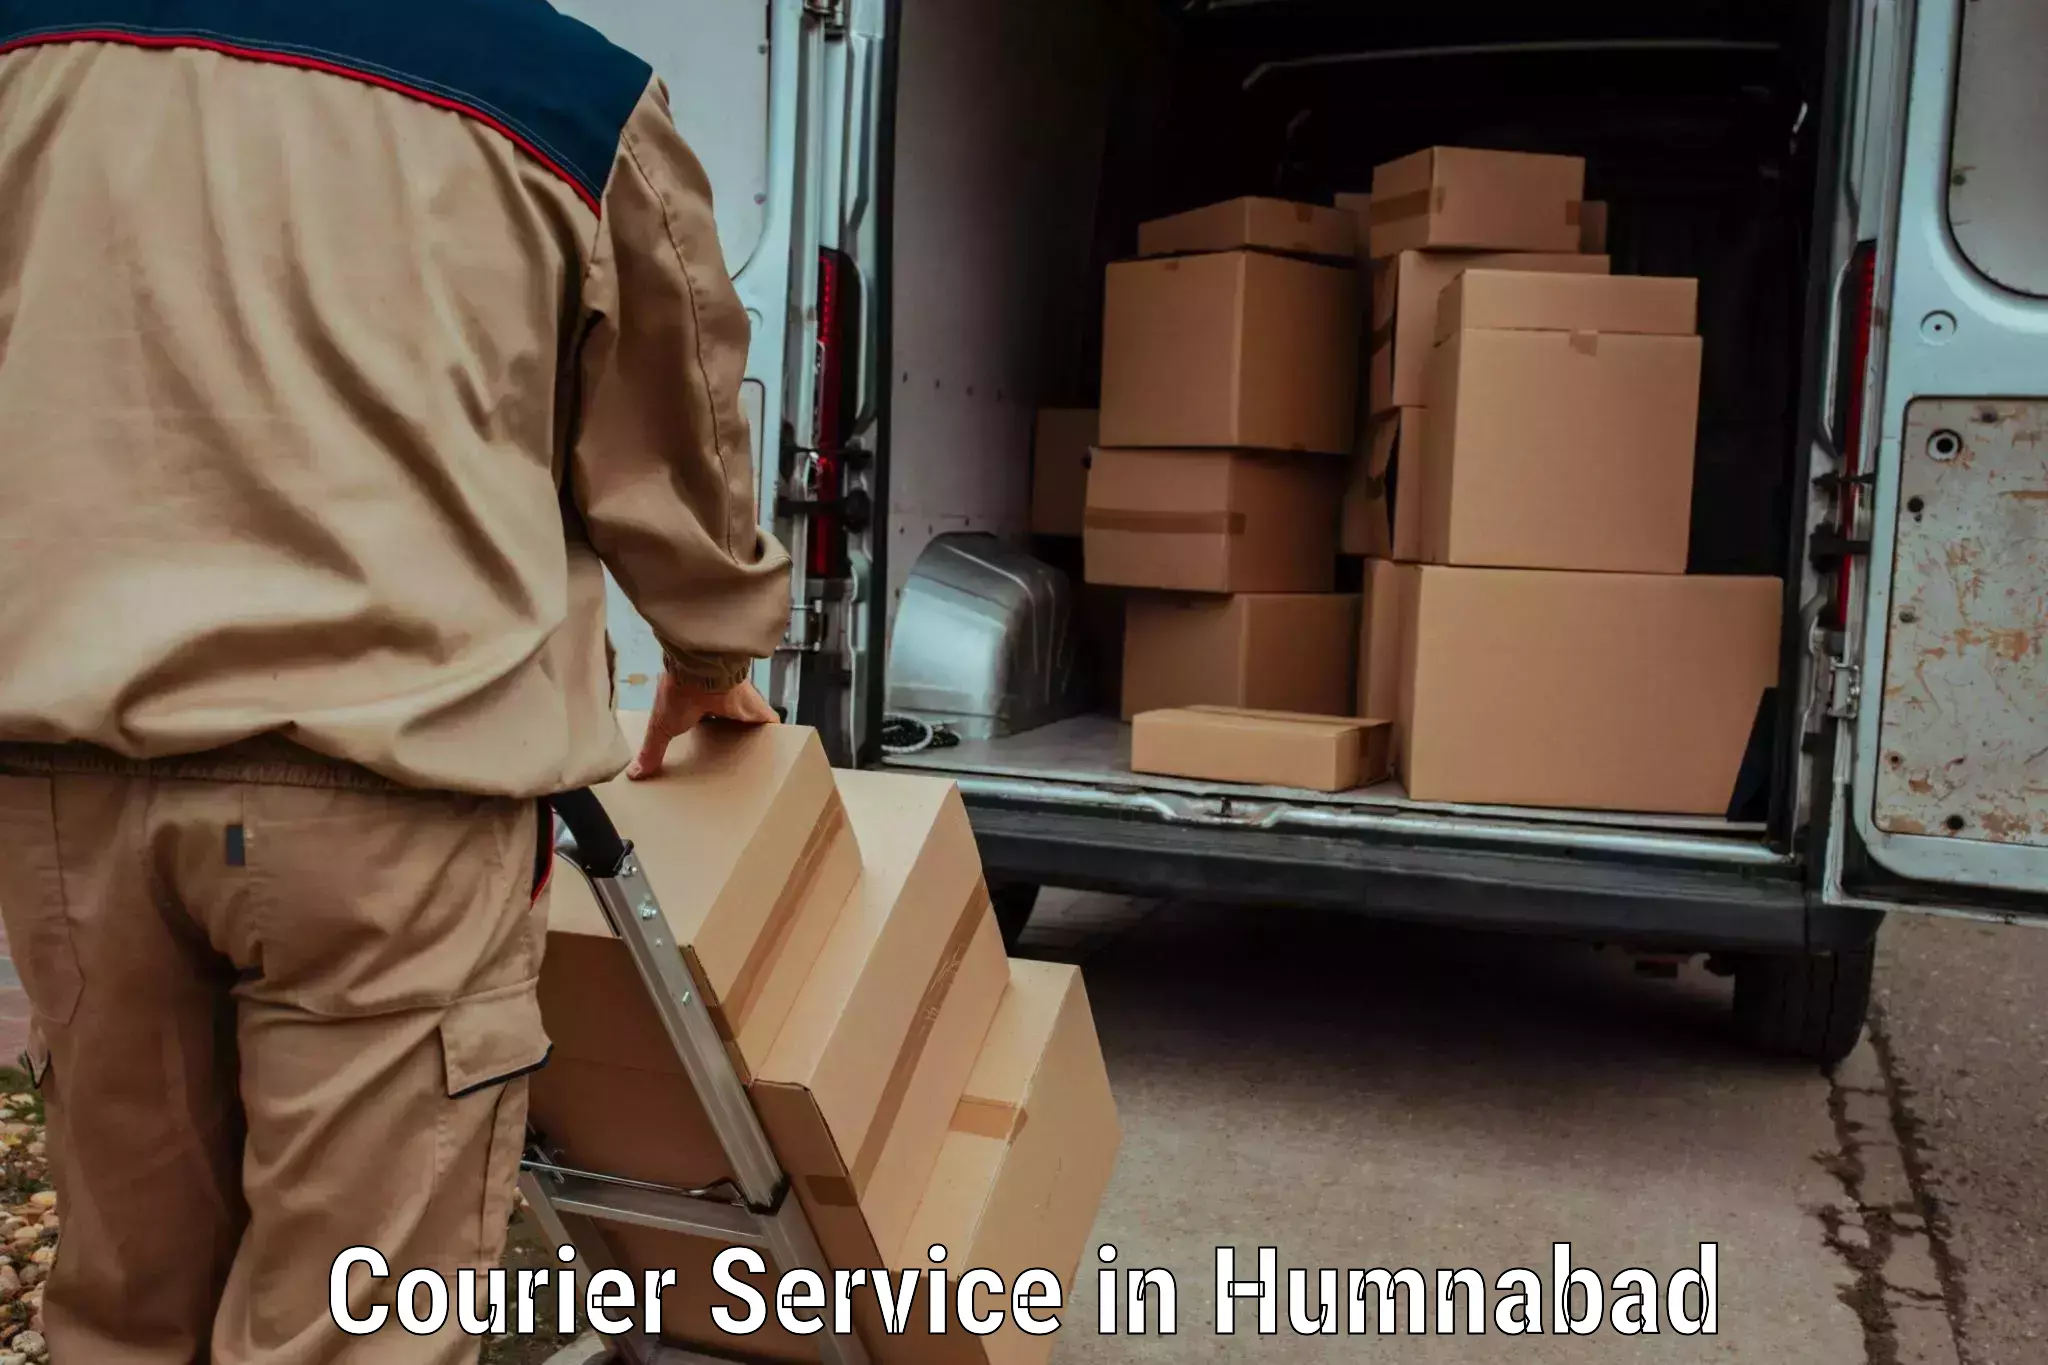 Holiday shipping services in Humnabad